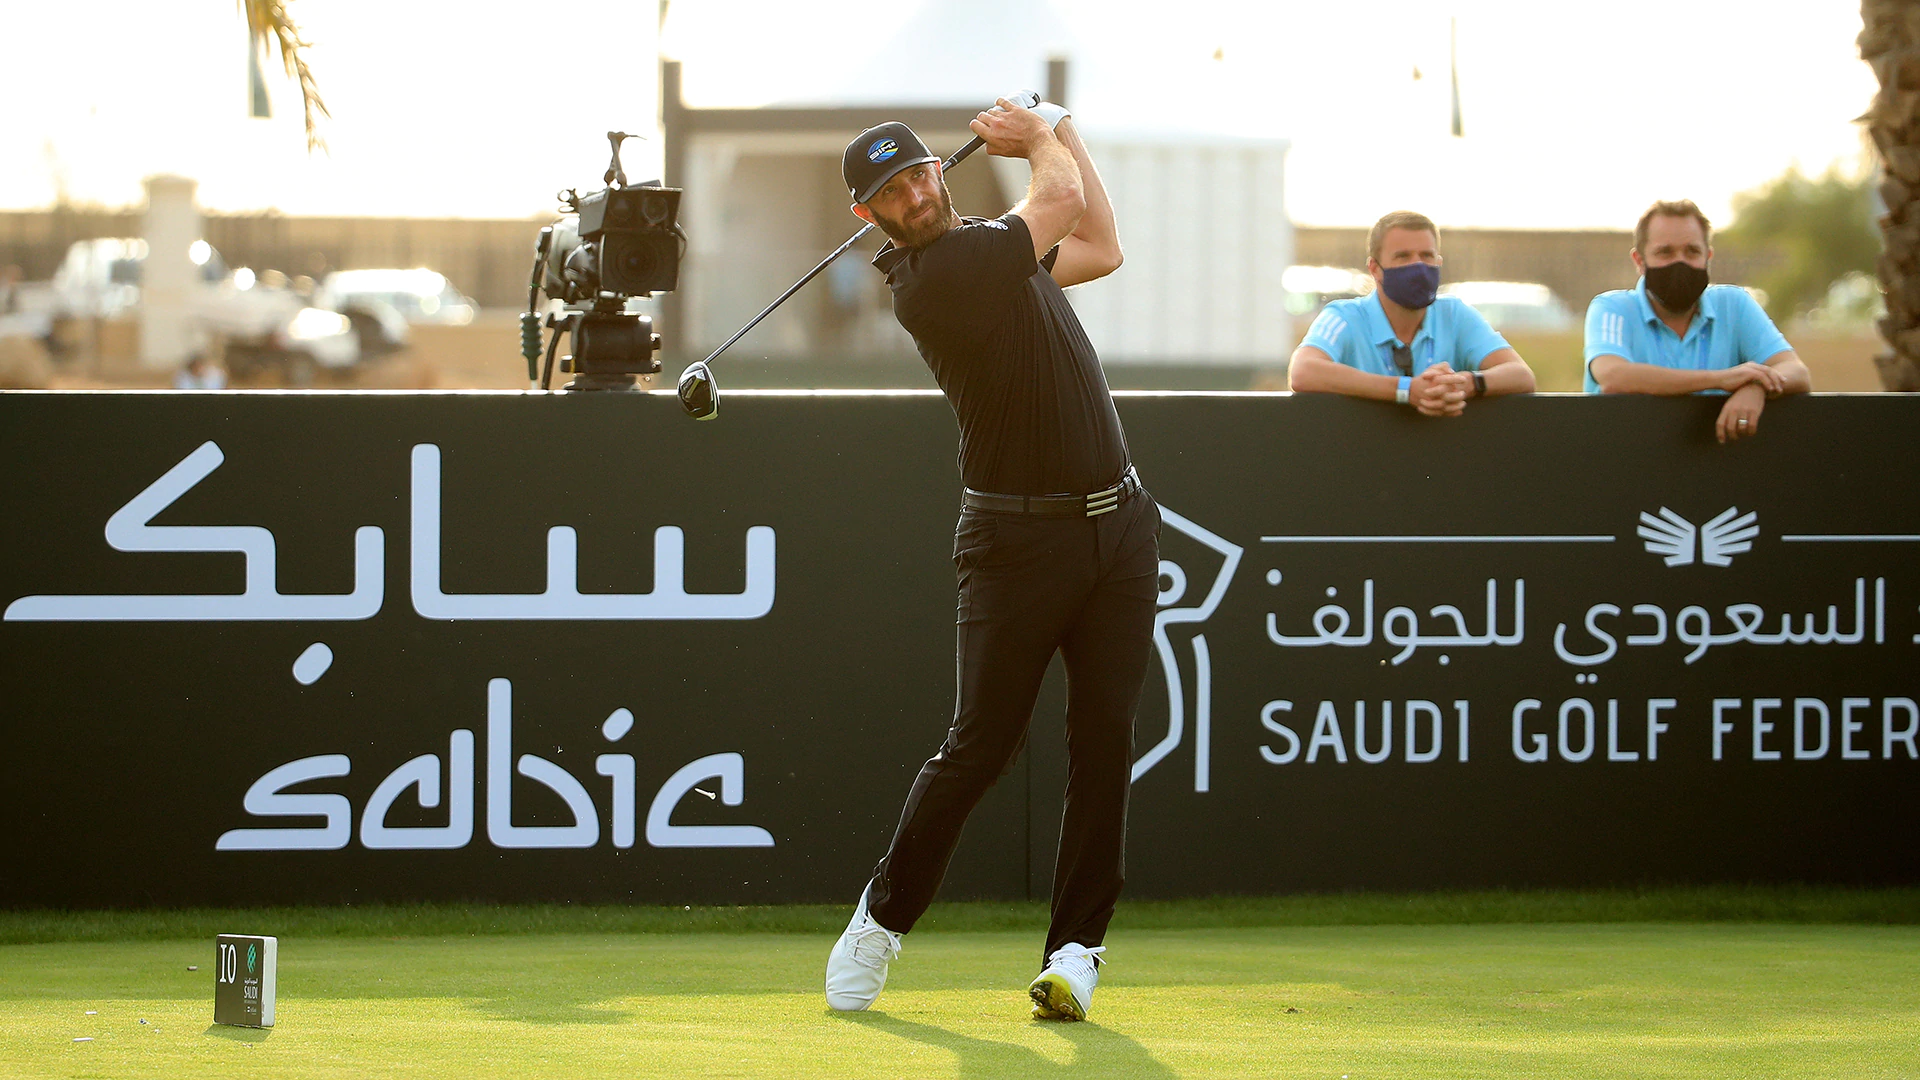 Ouch! Dustin Johnson hits volunteer on fly with drive in Saudi Arabia